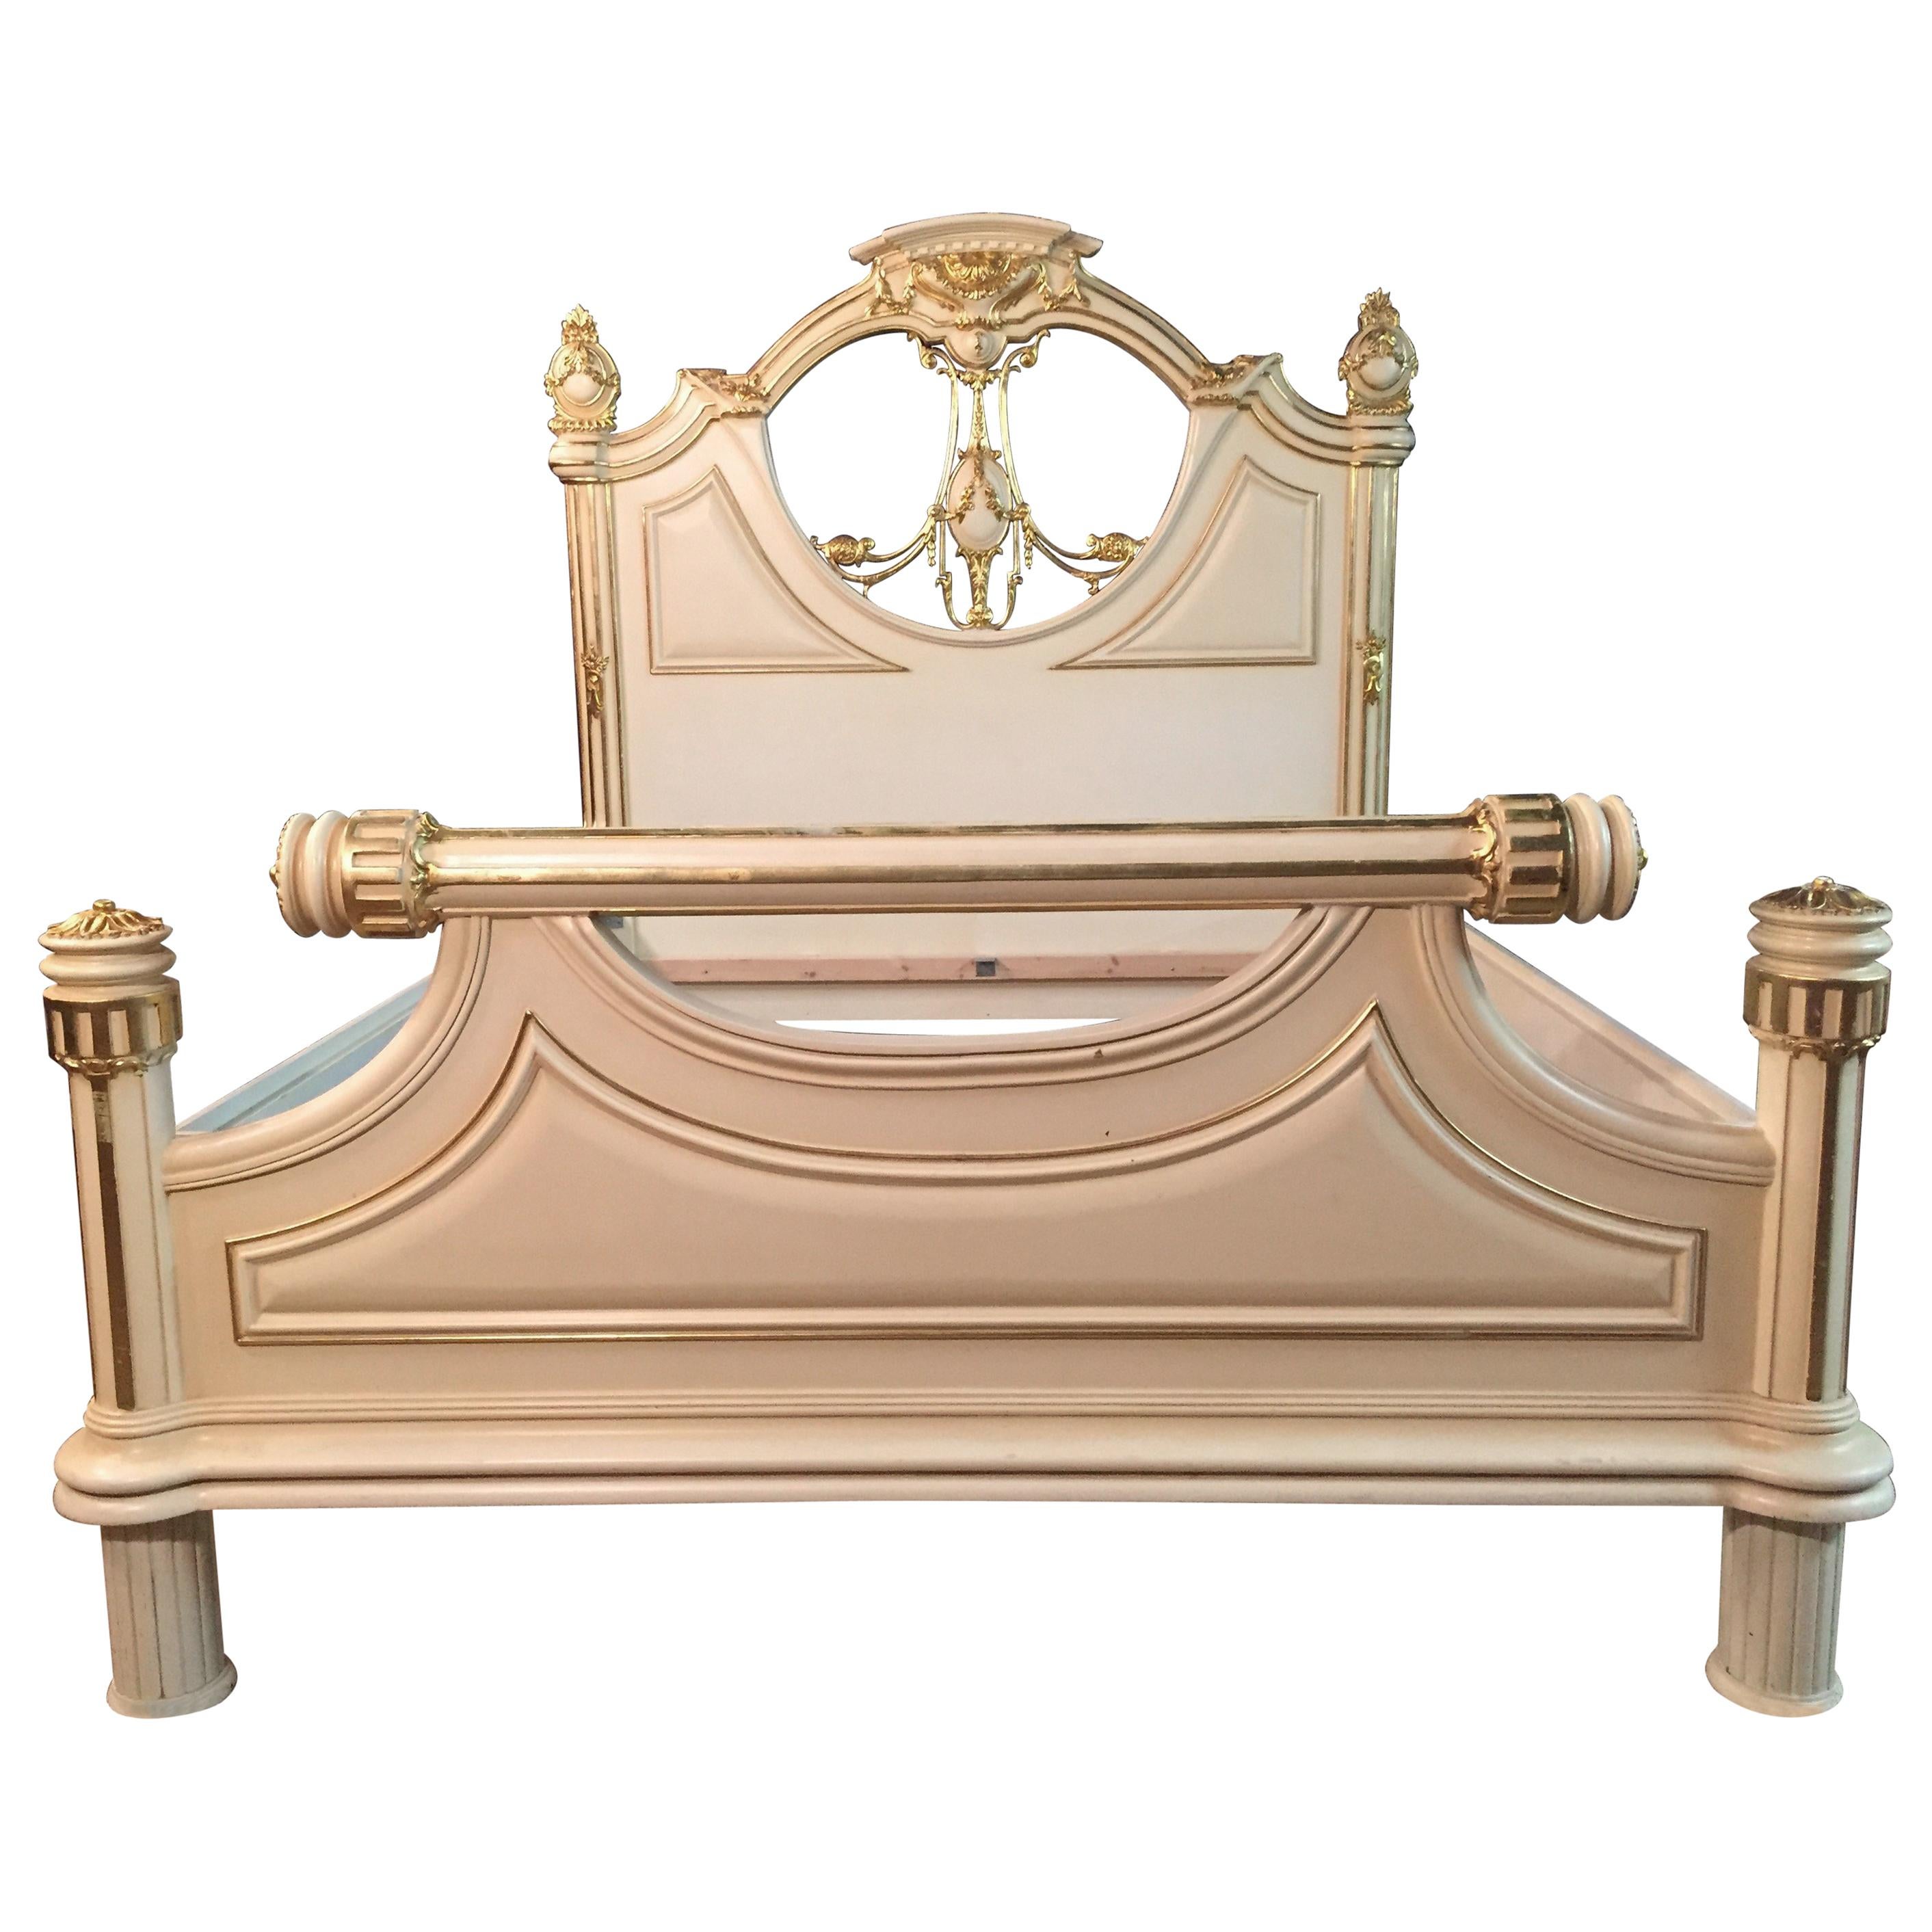 Majestic Baroque Bed in the antique  Style of Louis XVI beech hand carved